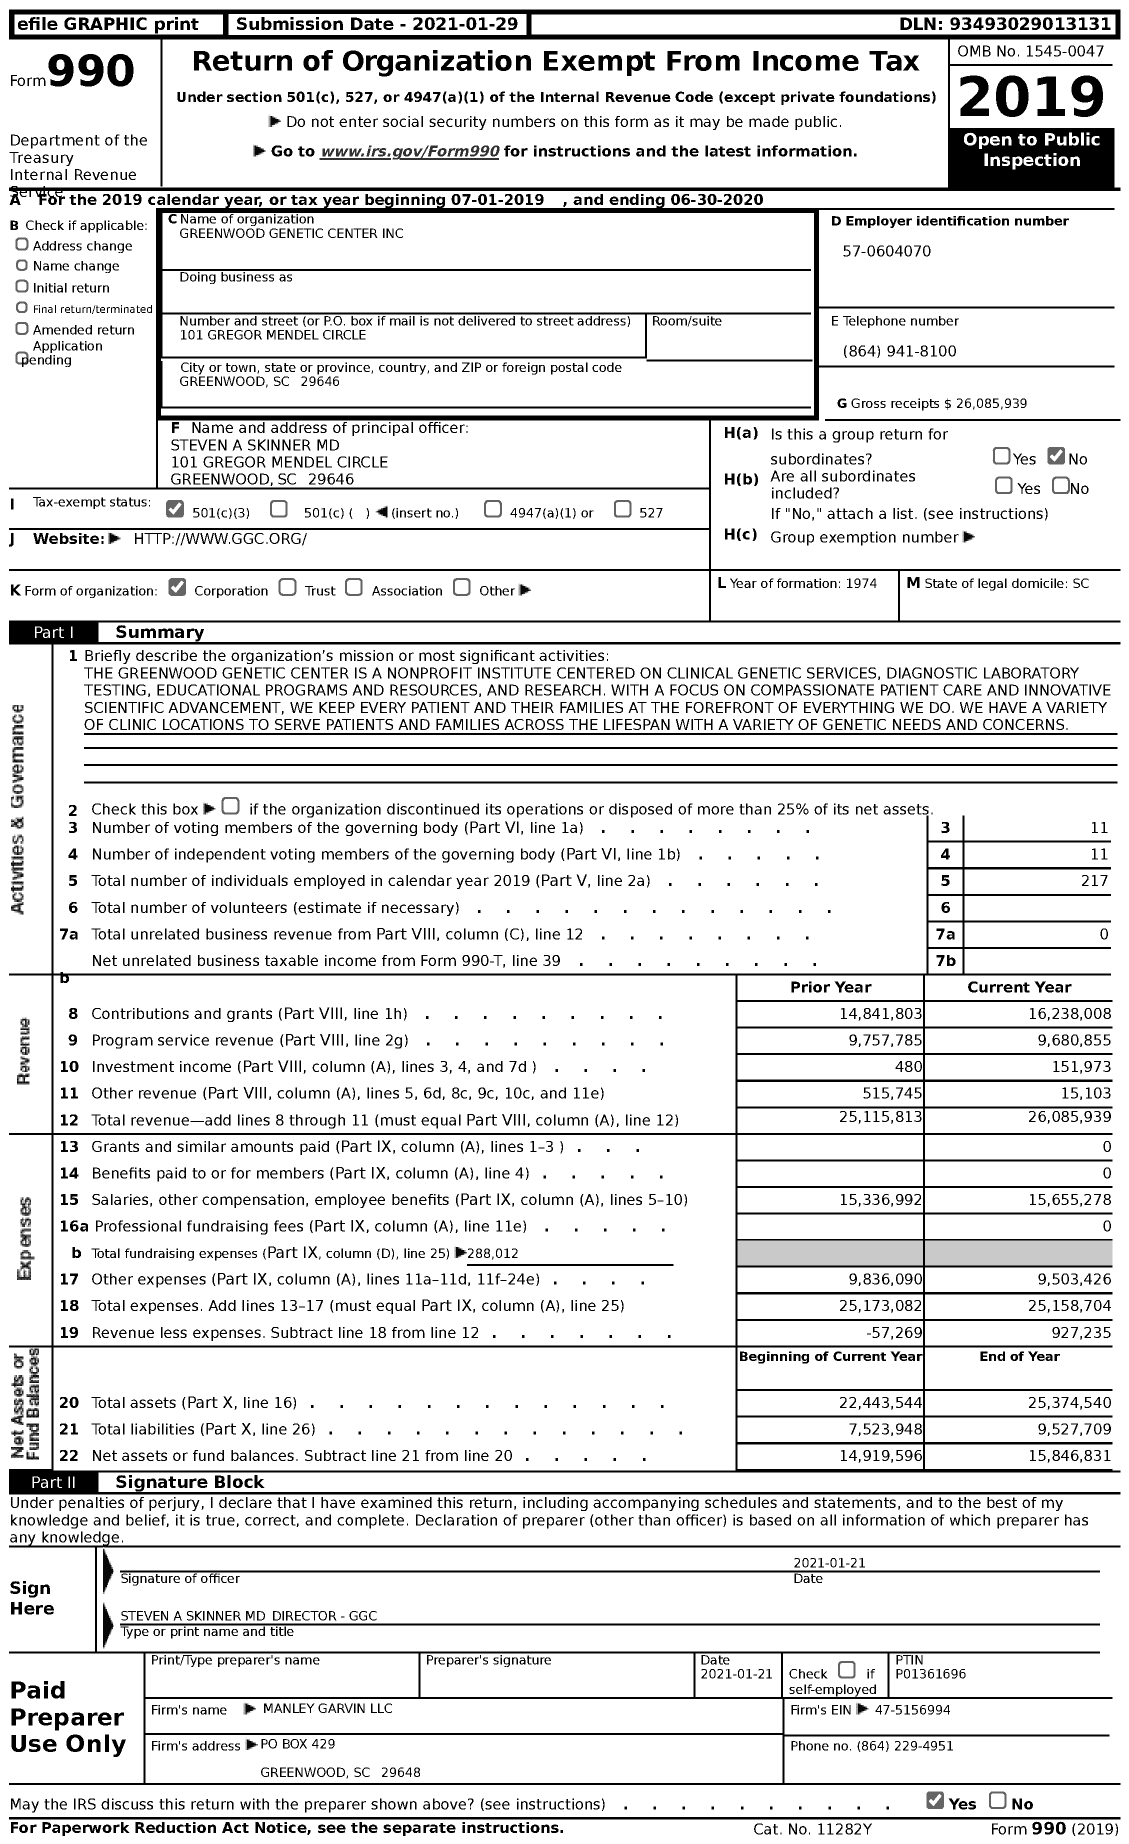 Image of first page of 2019 Form 990 for Greenwood Genetic Center (GGC)